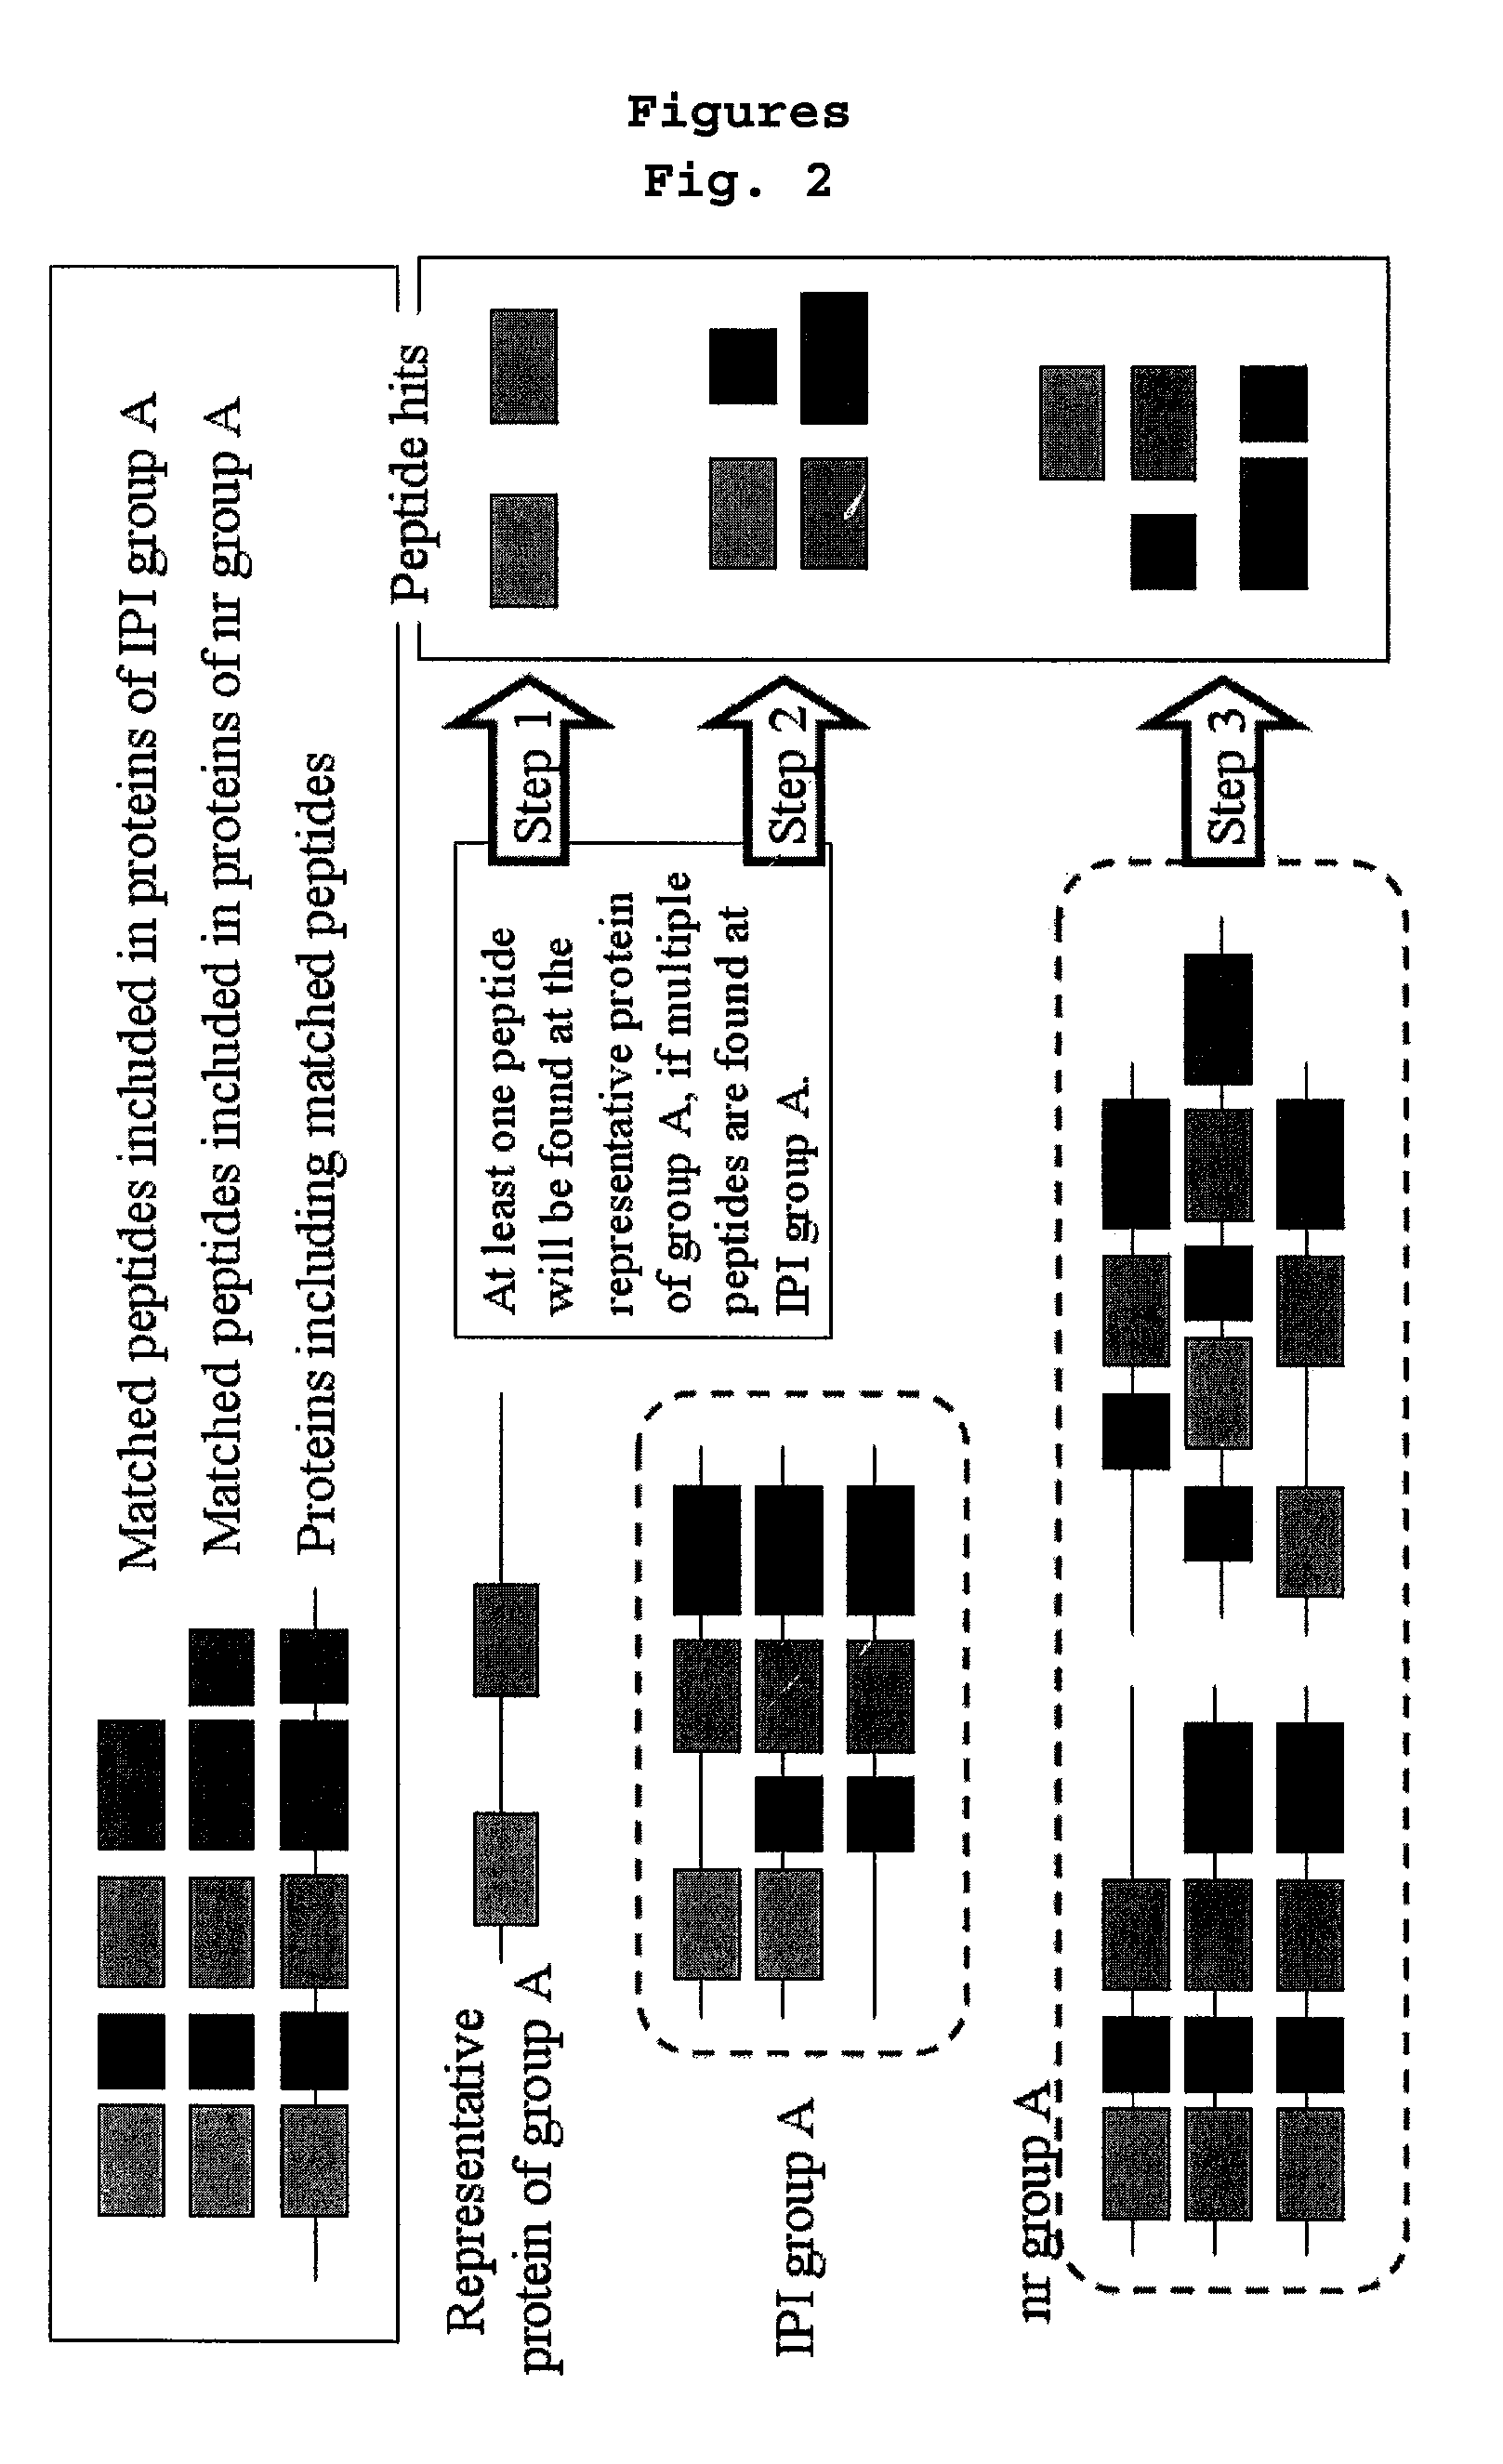 Method for reconstructing protein database and a method for screening proteins by using the same method